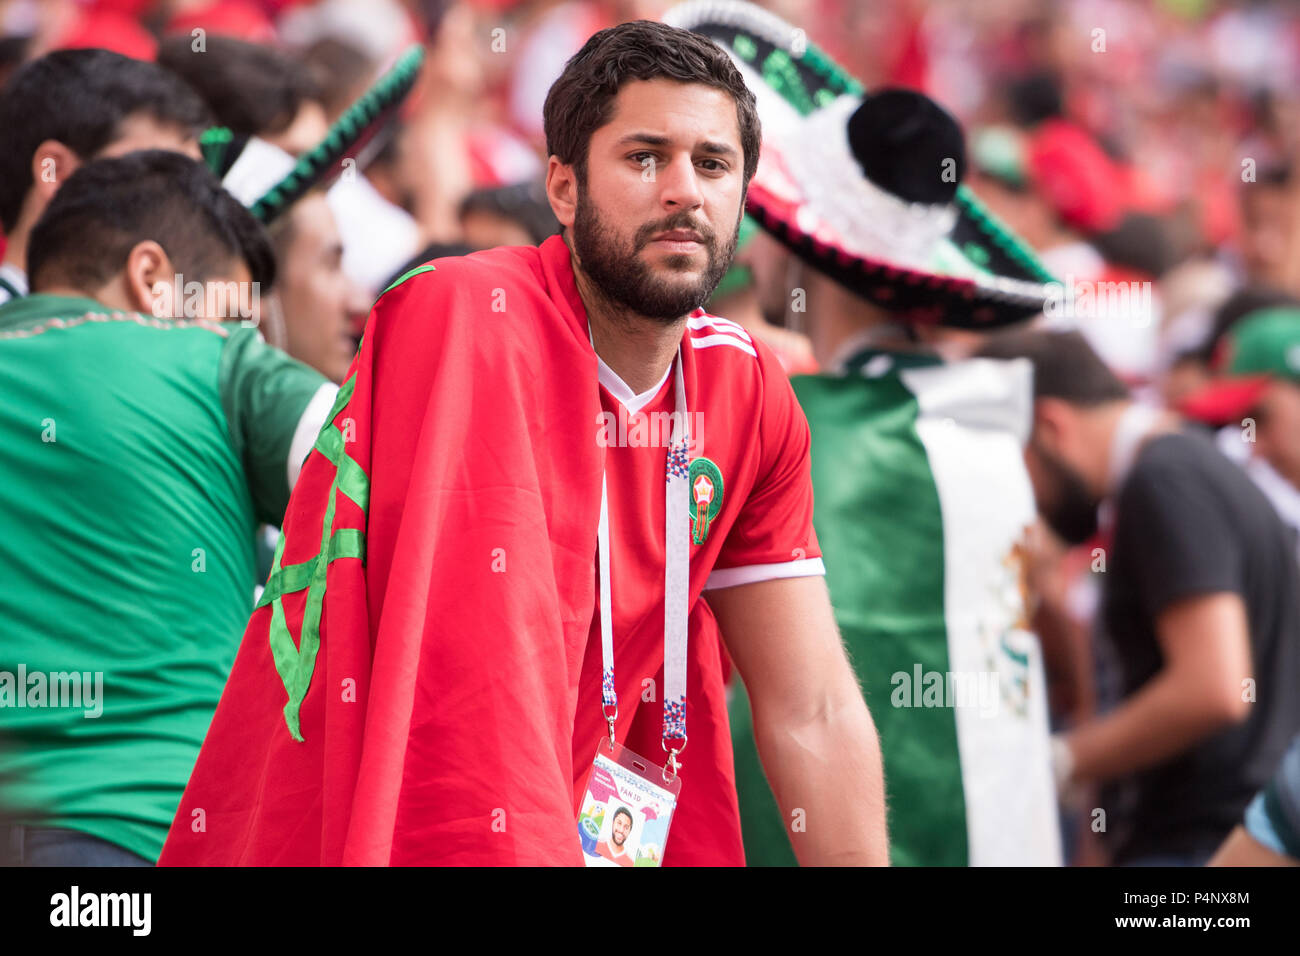 A Moroccan fans is disappointed after the defeat disappointed, frenzy, disappointment, sad, frustrated, frustrated, frustratedet, half figure, half figure, fan, fans, spectators, supporters, supporters, Portugal (POR) - Morocco (MAR) 1: 0, Preliminary Round, Group B, Game 19, on 20.06.2018 in Moscow; Football World Cup 2018 in Russia from 14.06. - 15.07.2018. | usage worldwide Stock Photo